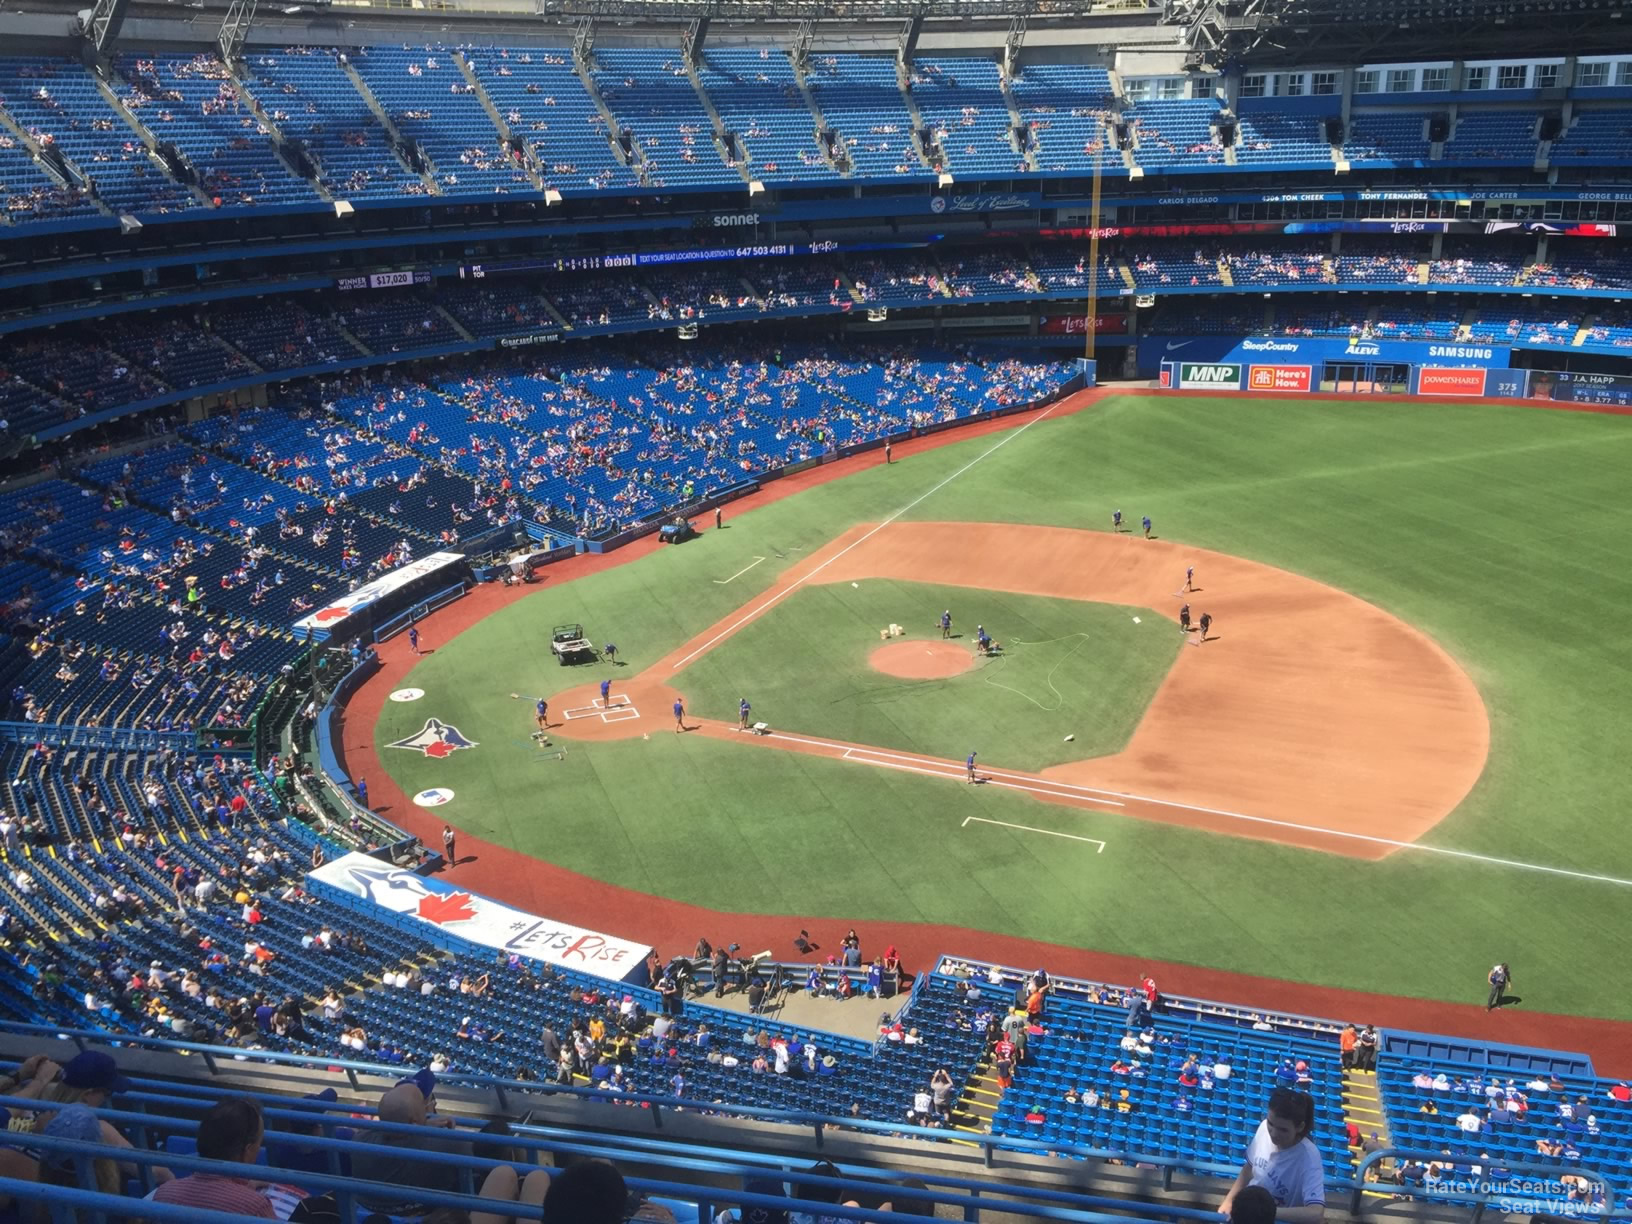 Section 517 at Rogers Centre 